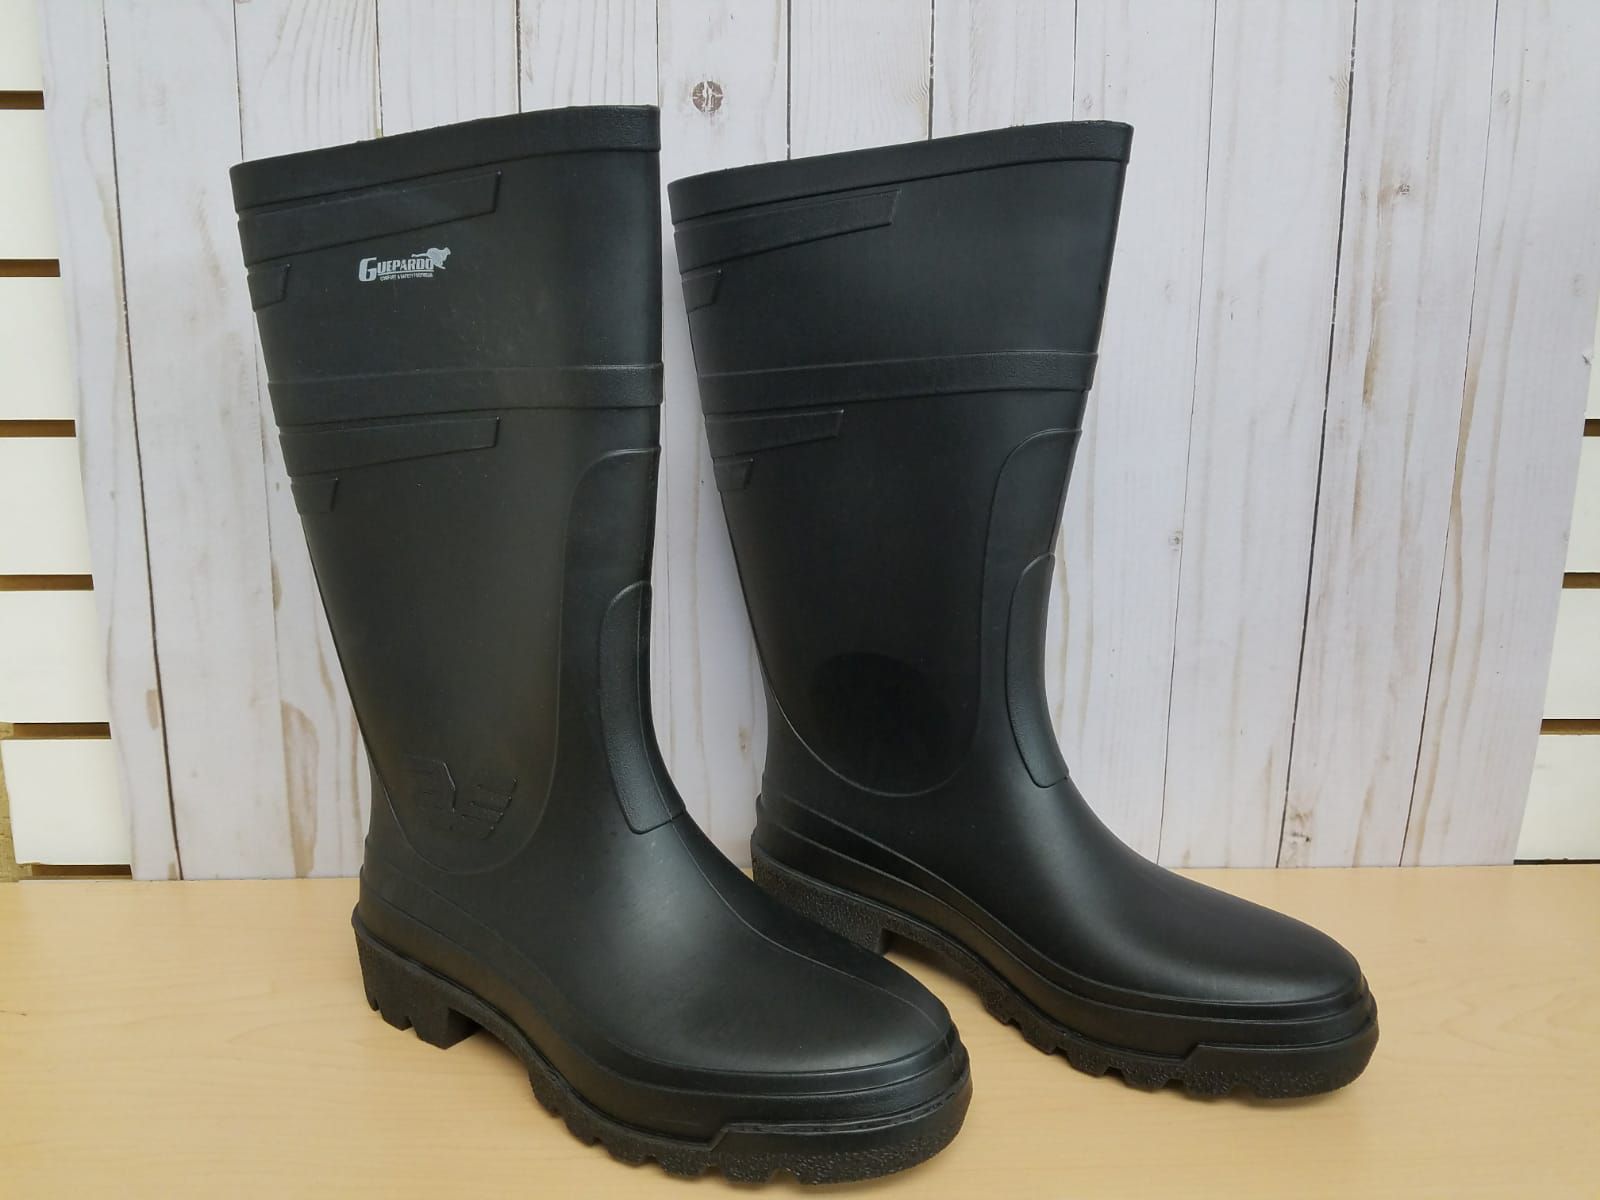 Men's WATERPROOF Boots/ Rubber Boots!!!! ONLY $22